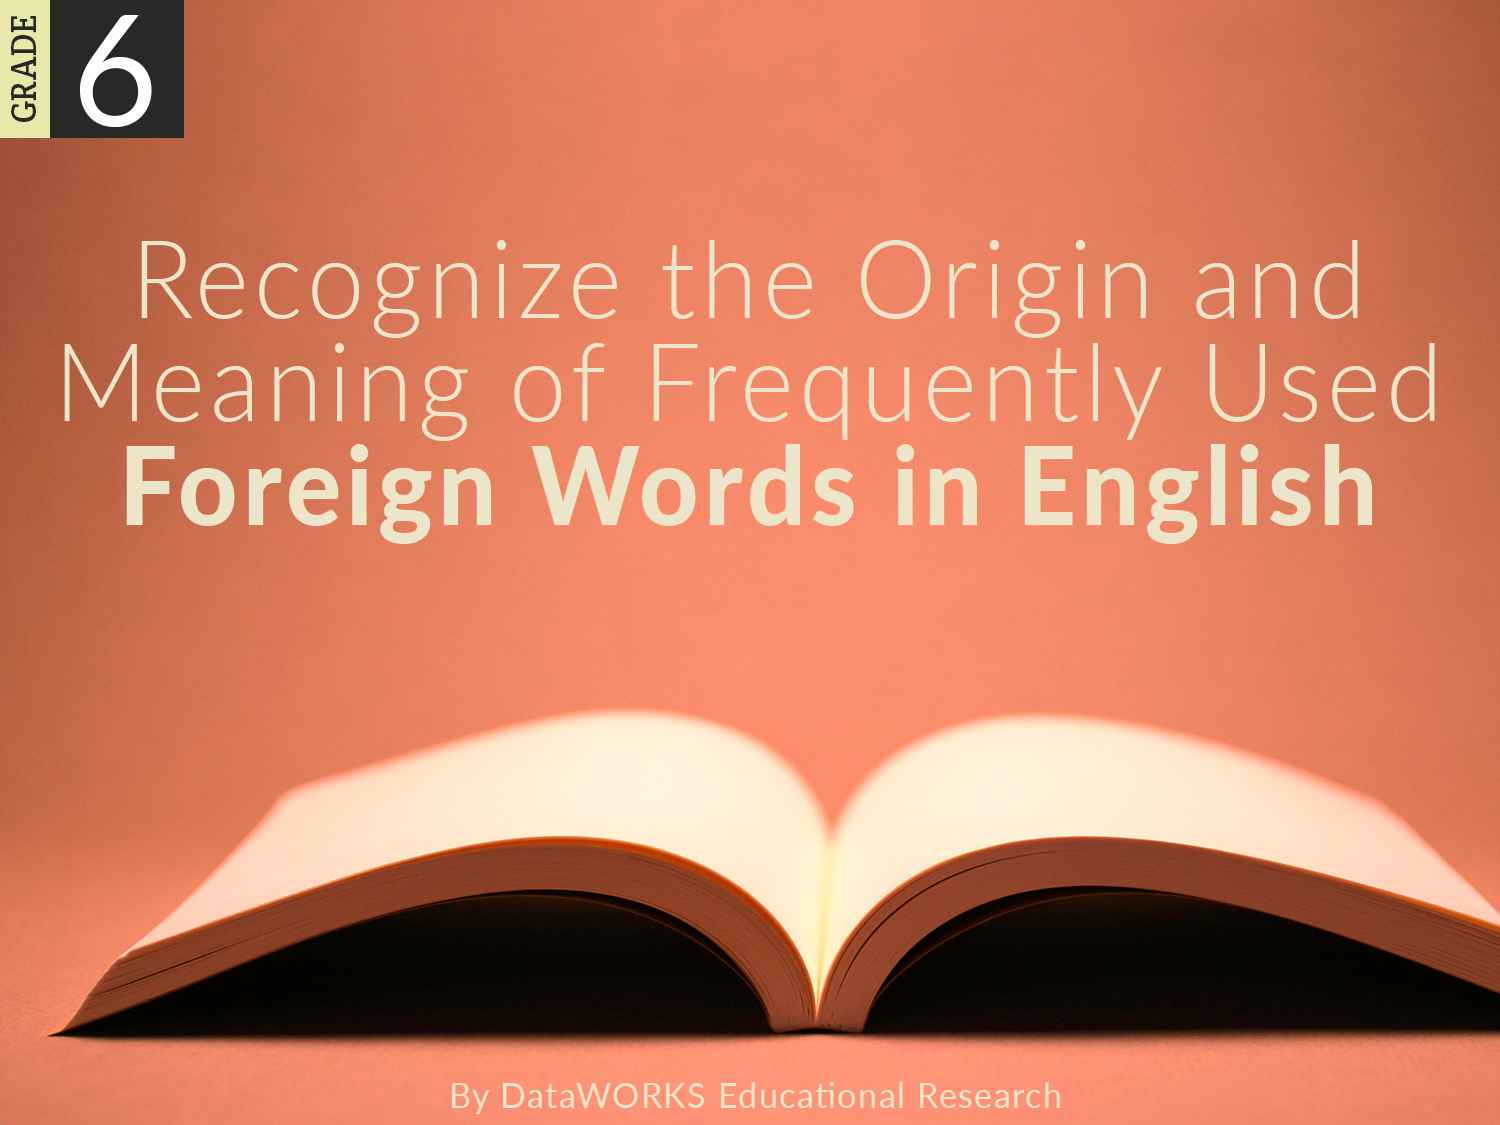 recognize-the-origin-and-meaning-of-frequently-used-foreign-words-in